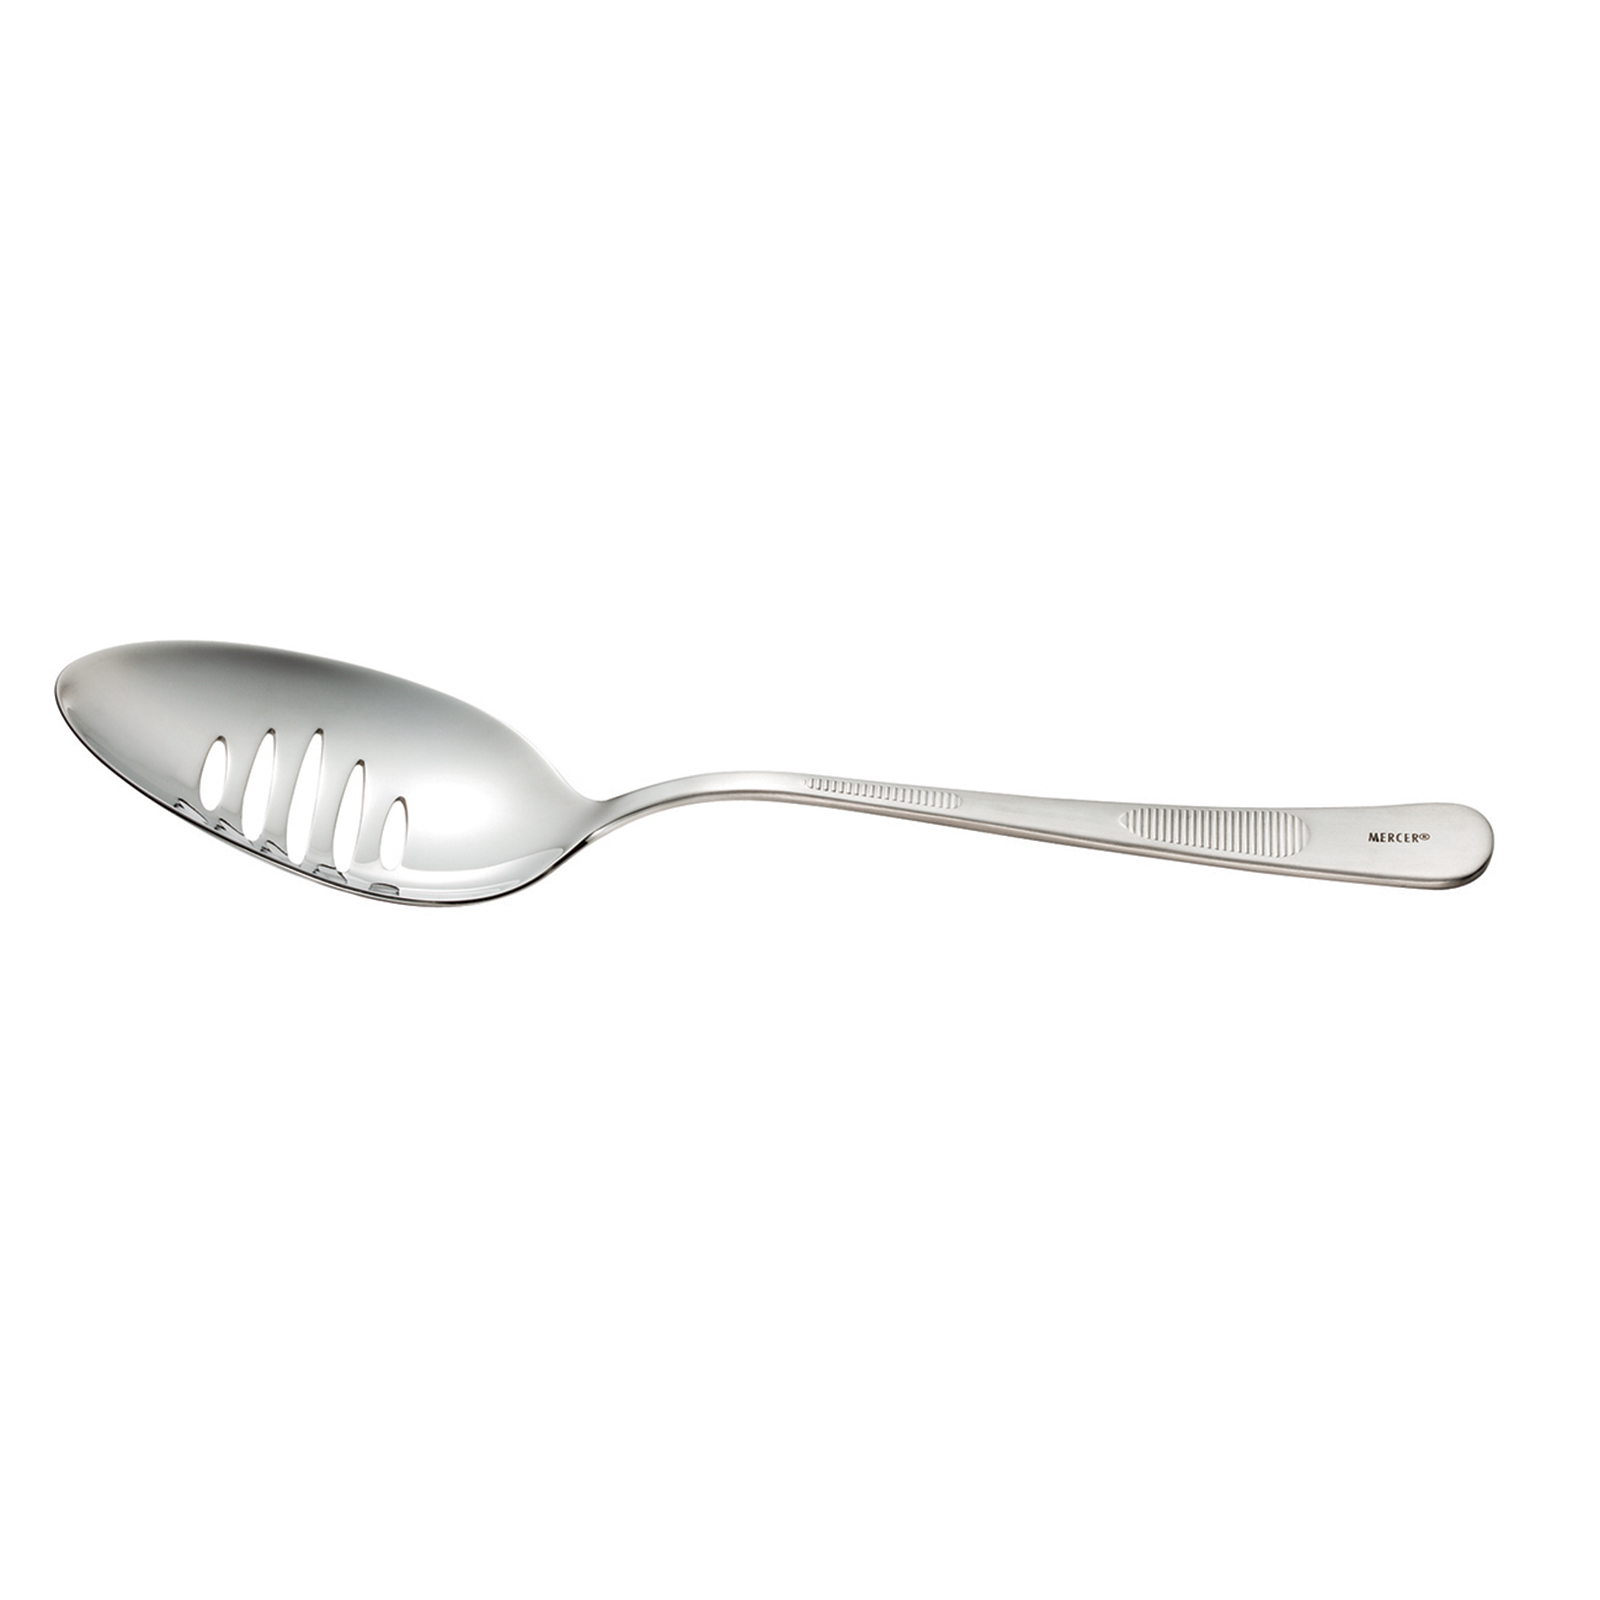 Mercer Culinary M35139 Serving Spoon, Slotted